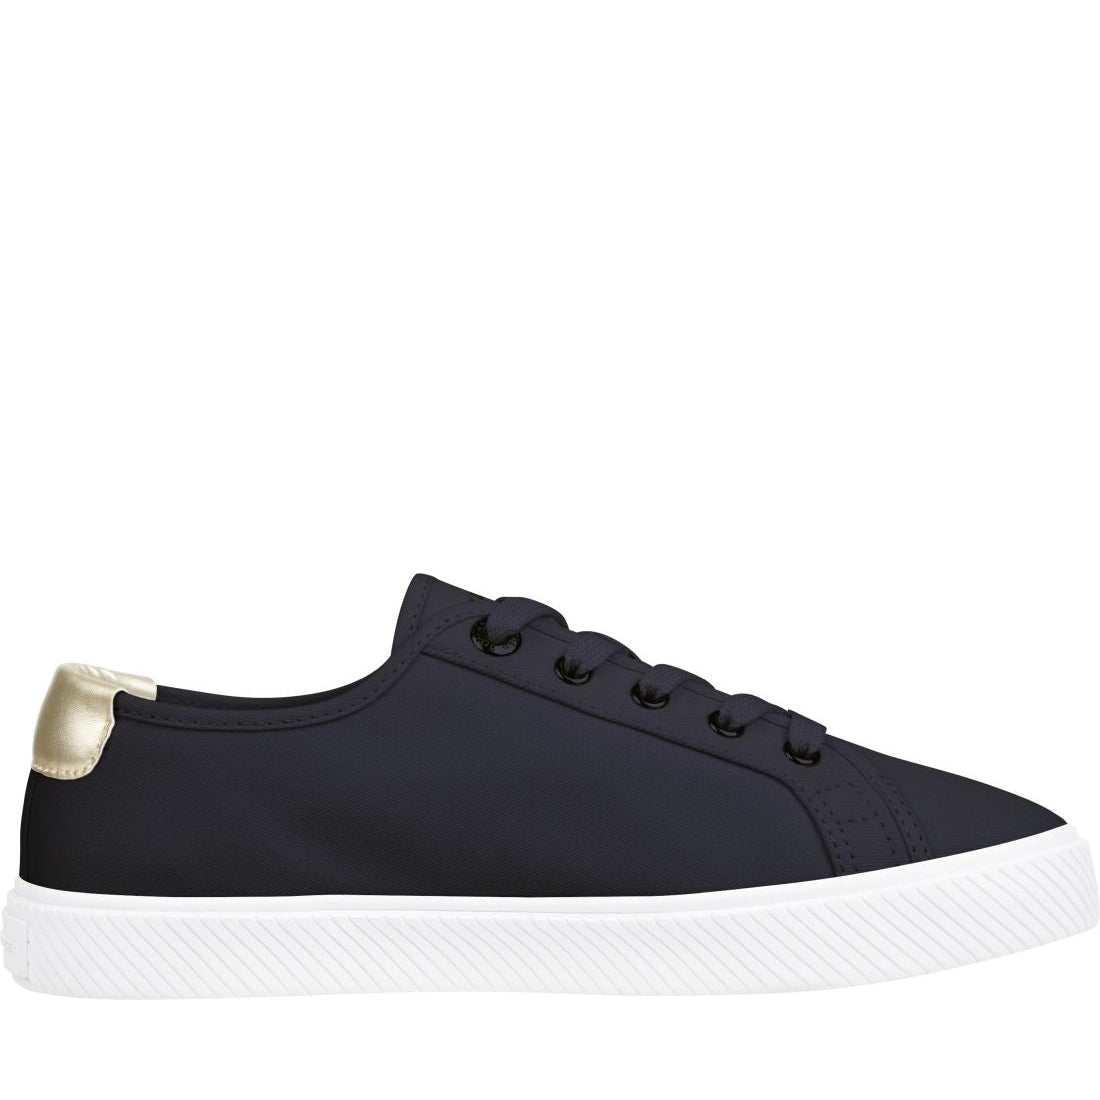 Tommy Hilfiger womens space blue lace up sneaker | Vilbury London